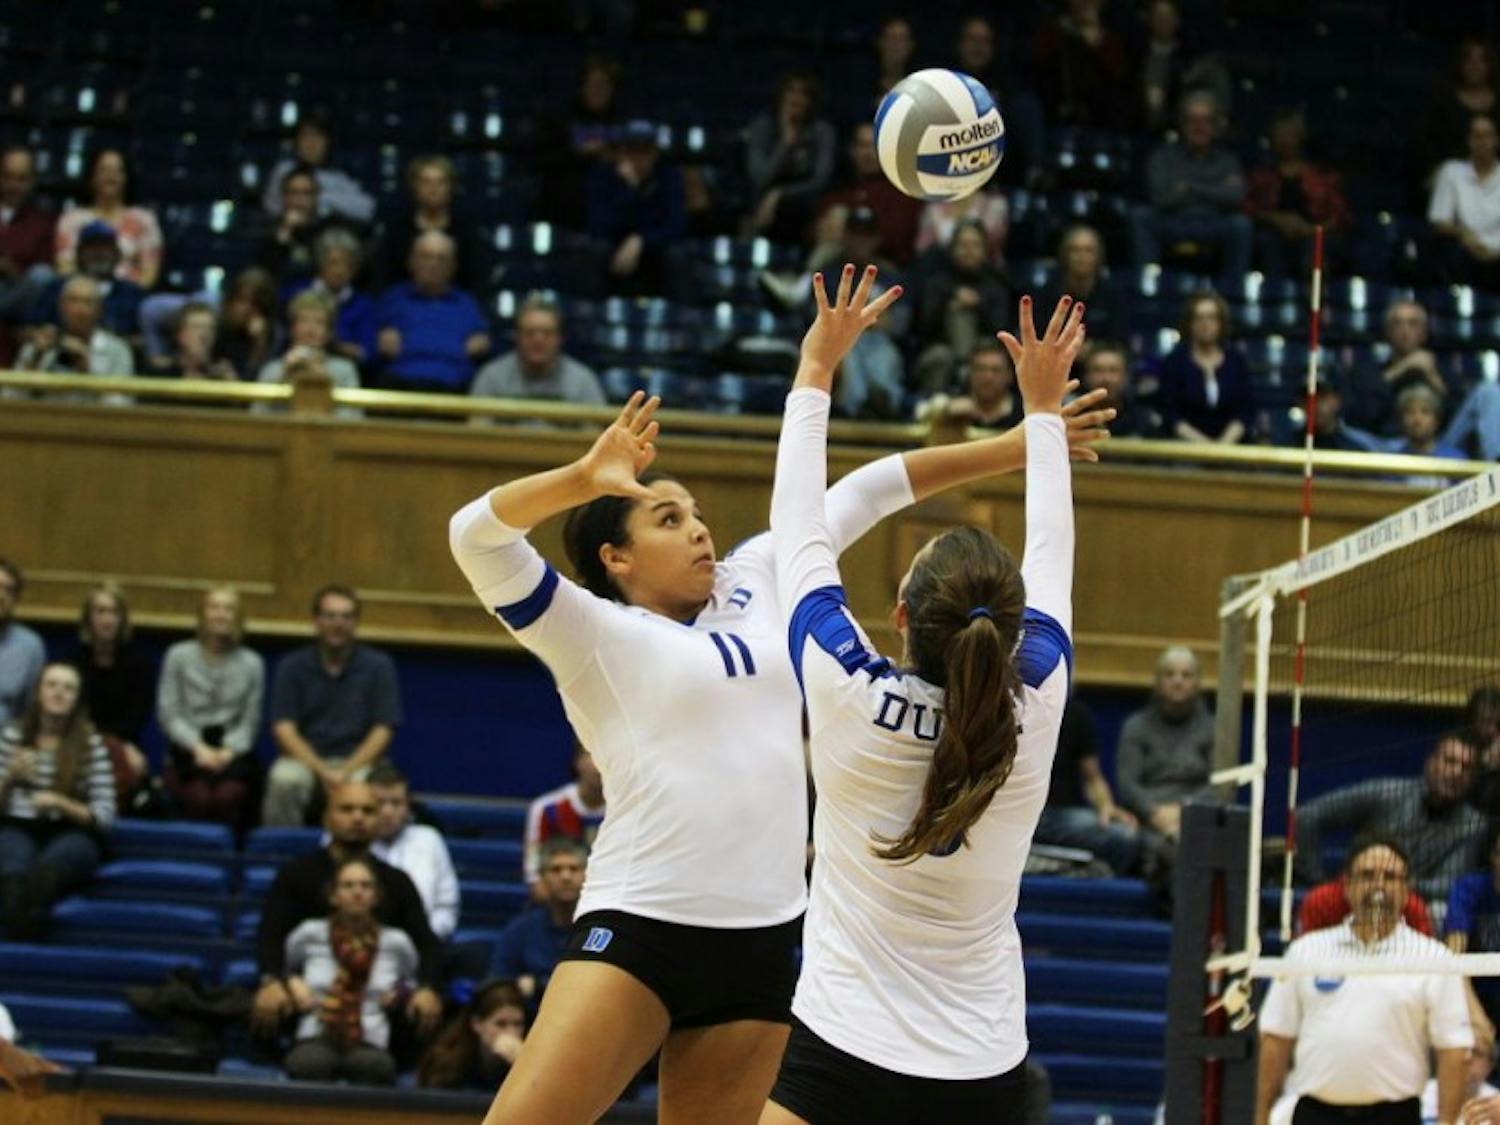 Jordan Tucker hopes to lead Duke to the NCAA tournament after finishing second on the team last year in kills.&nbsp;